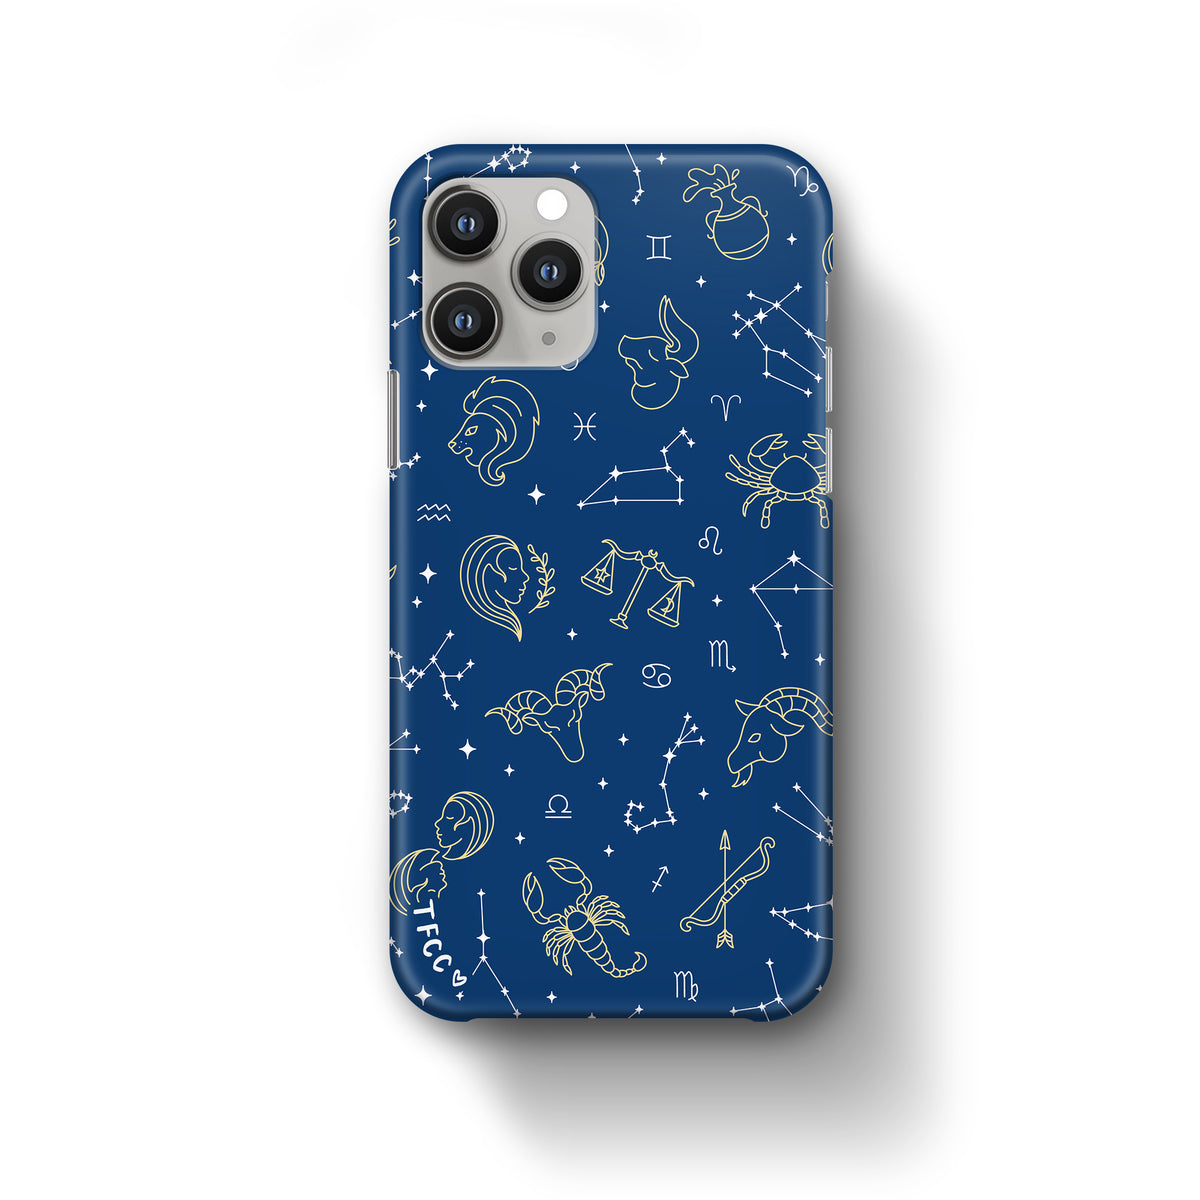 STAR SIGN CASE - thefonecasecompany